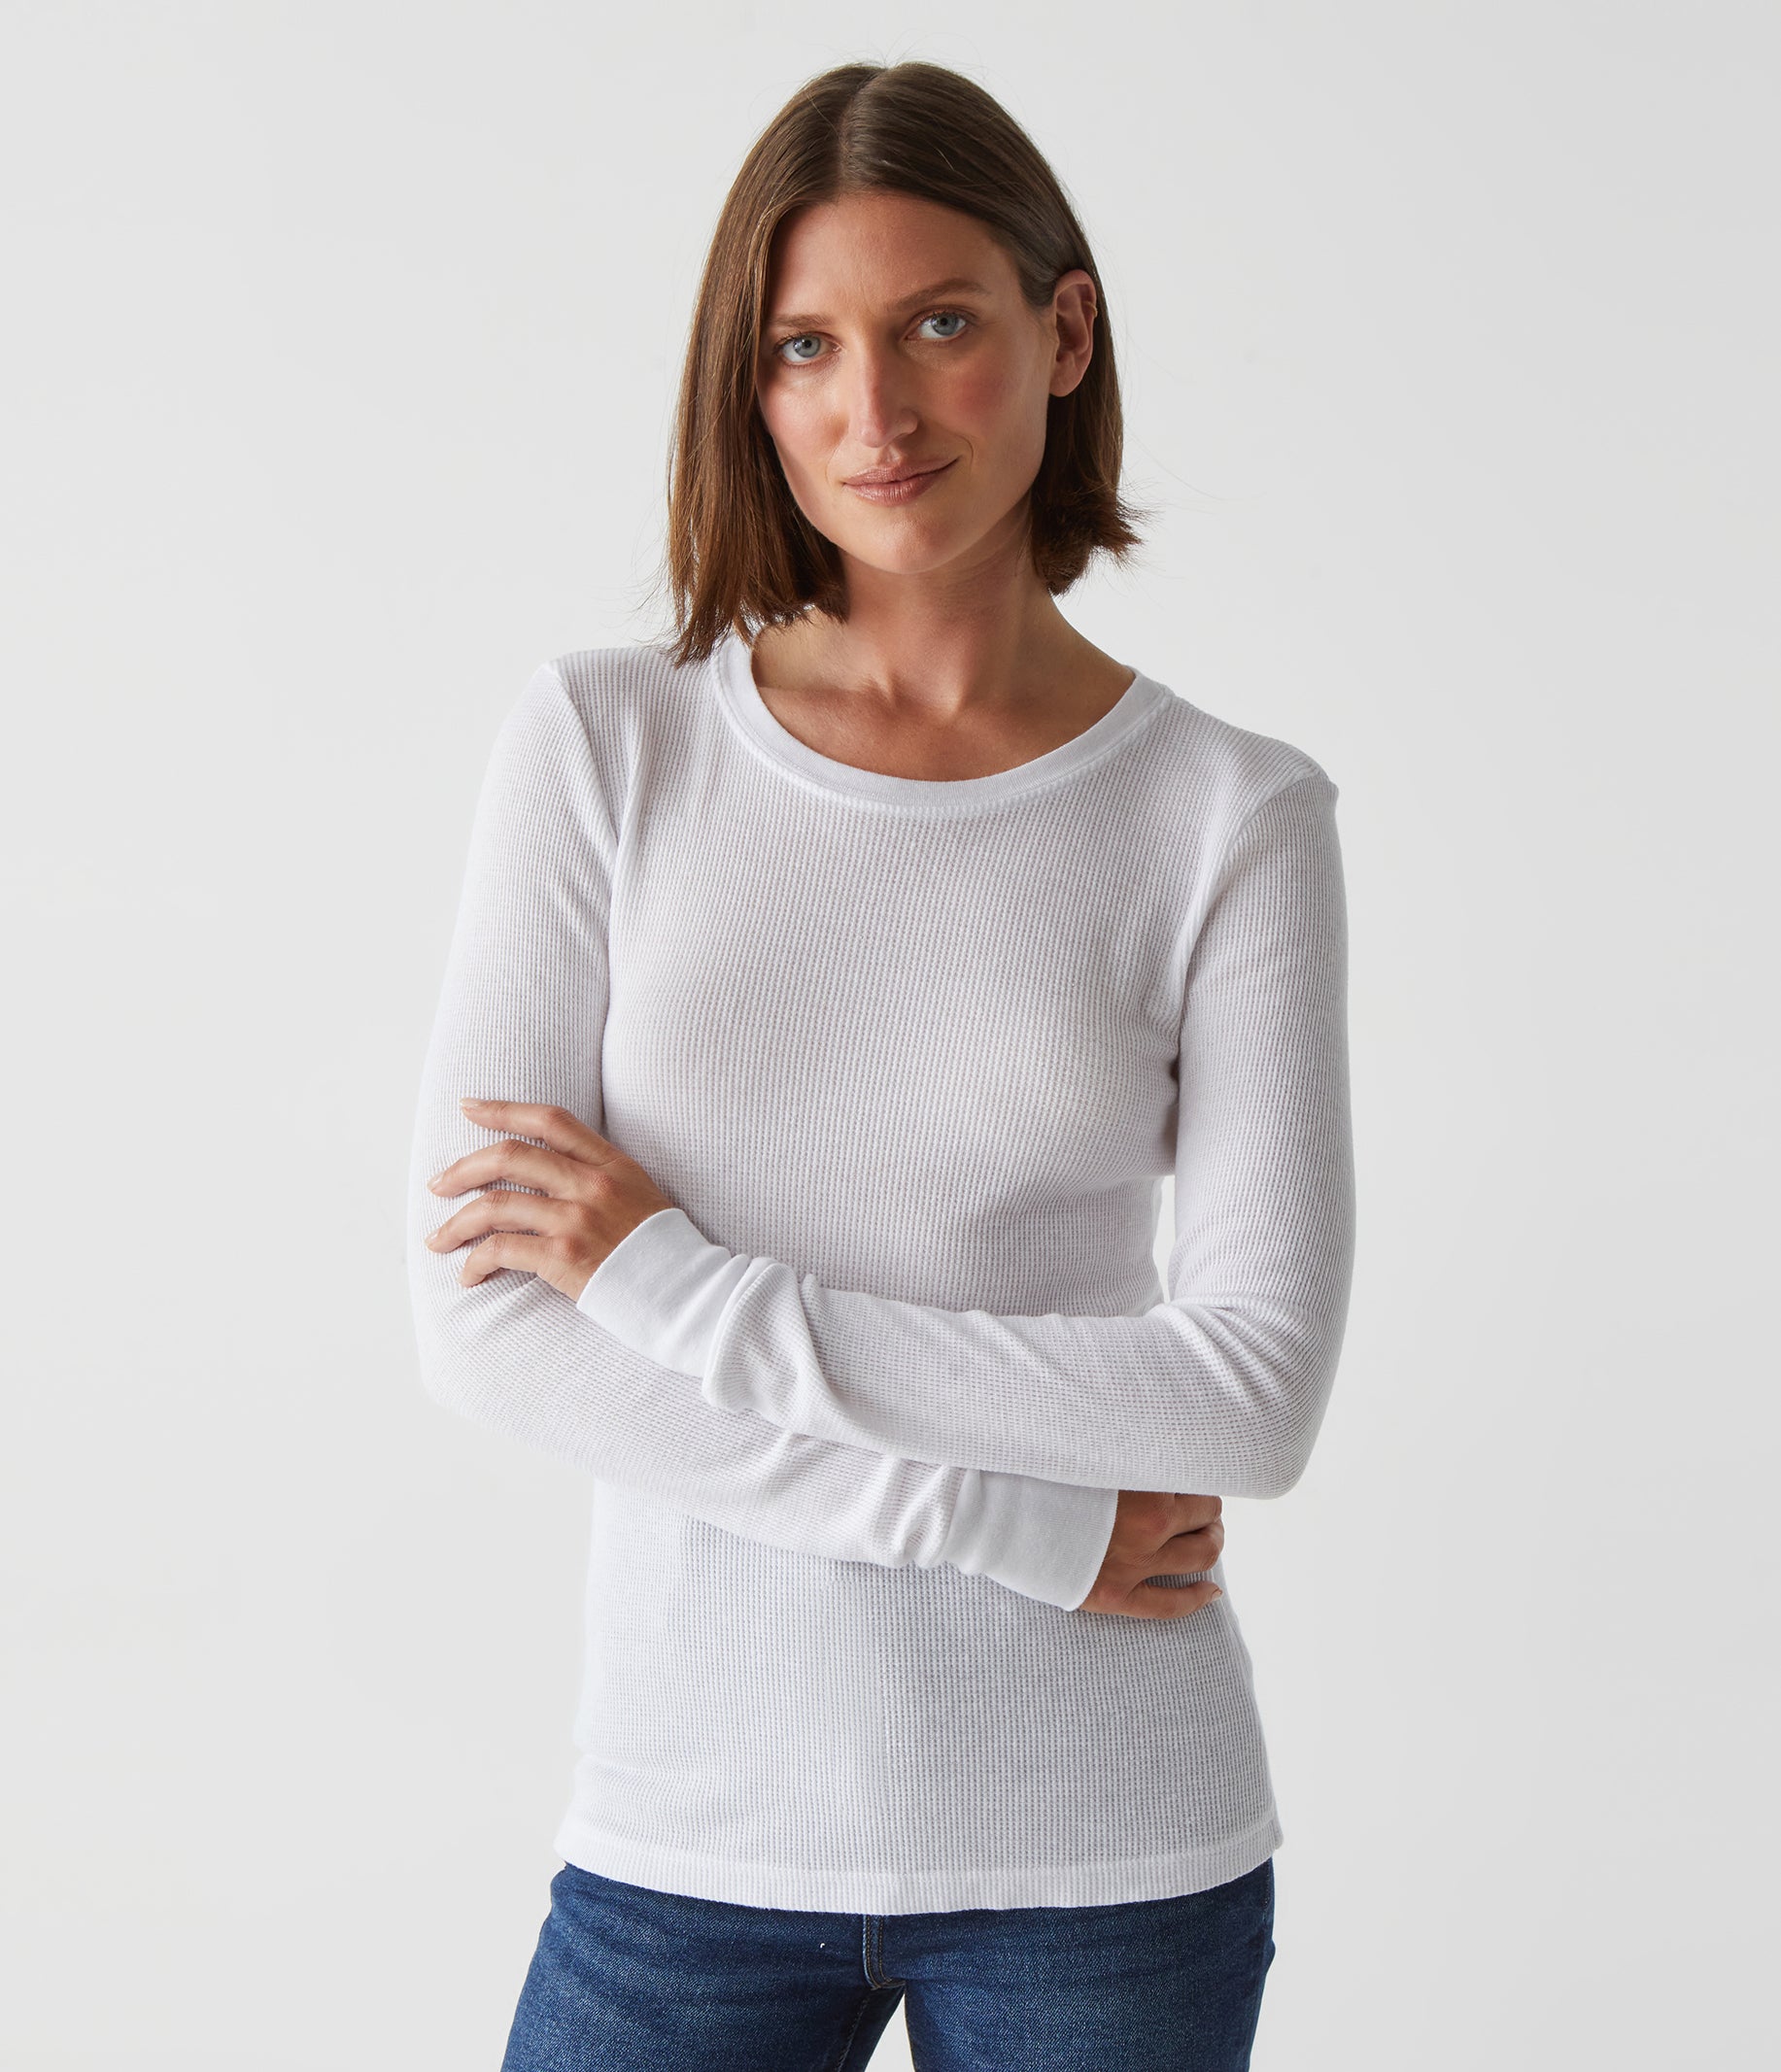 ONN Womens Cotton Thermal Top Charcoal Grey, 3/4th Sleeve U-Neck